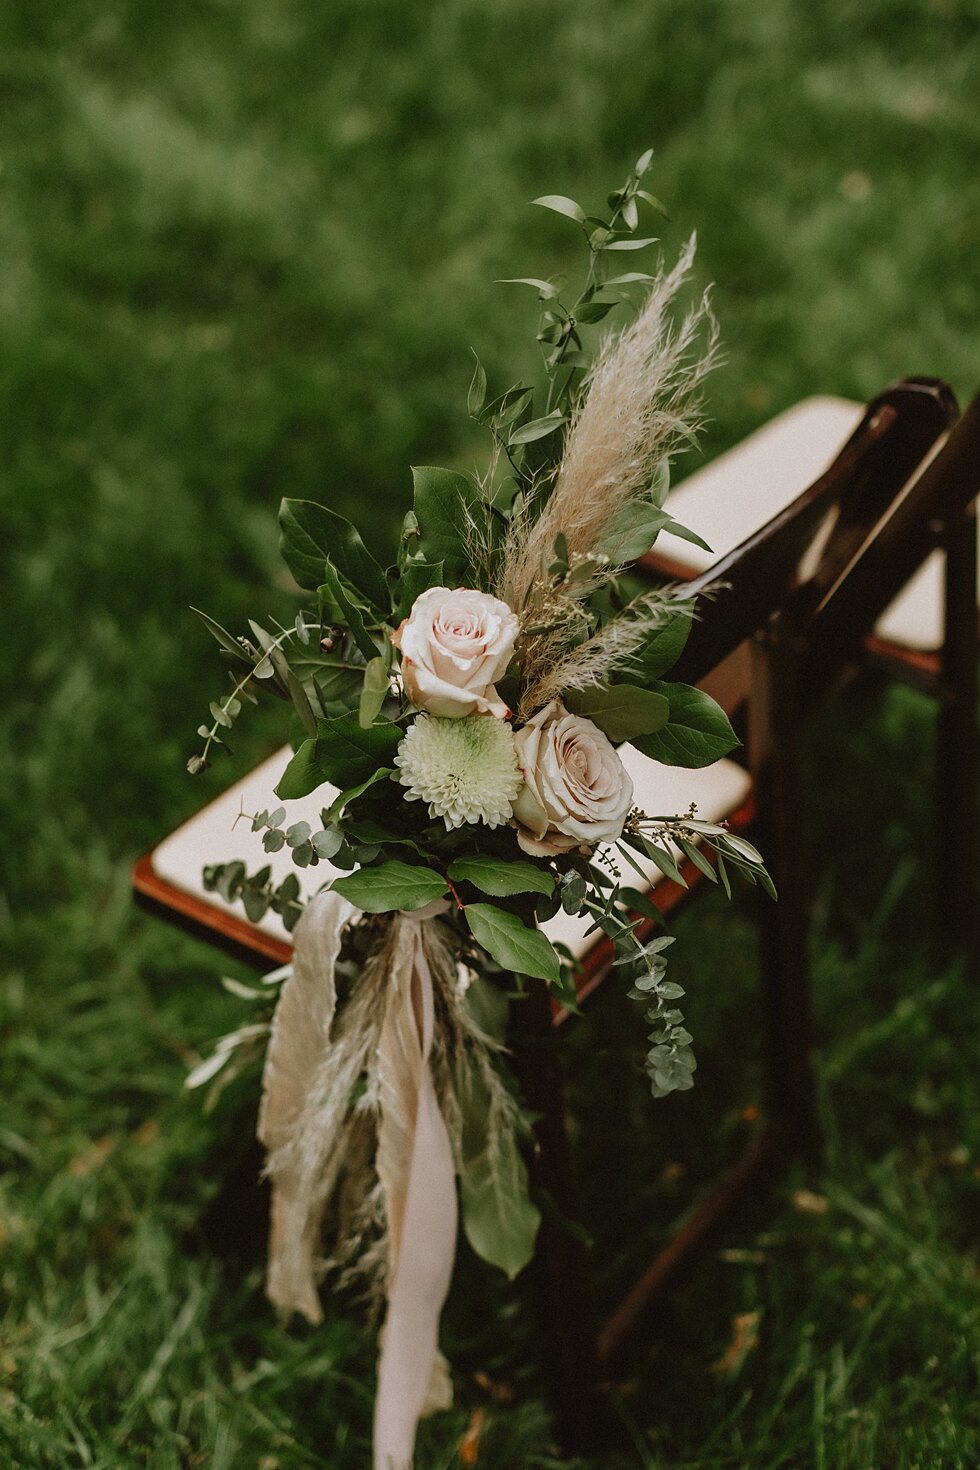  Each chair had such special touches as the floral arrangements were tied to the chairbacks and were stunning. elopement goshen crest farm louisville kentucky elopement photographer simplistic sweet intimate stunning backyard farm wedding #springwedd